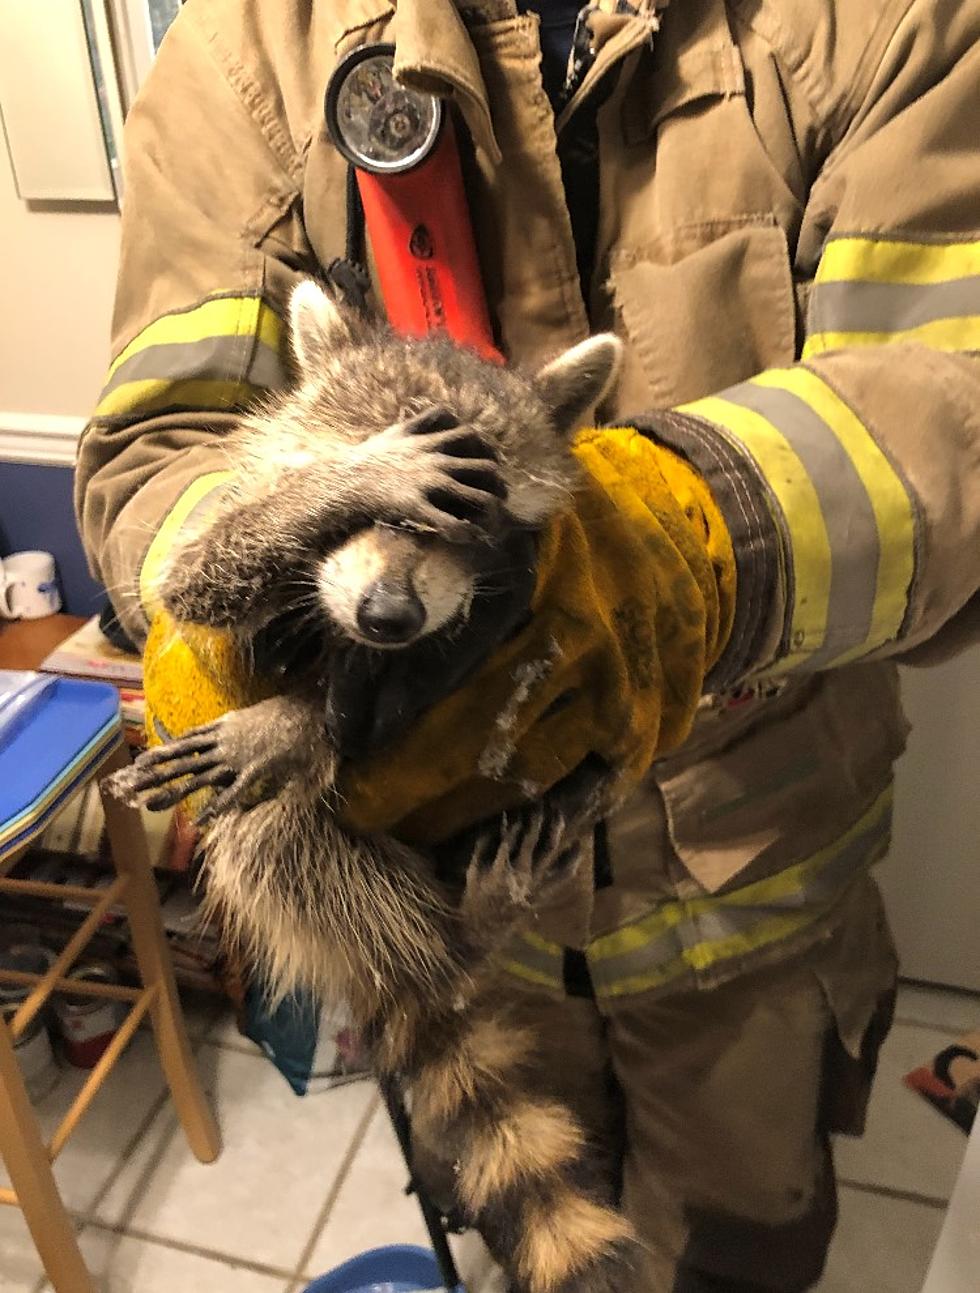 "Embarrassed Raccoon" Rescued From Home